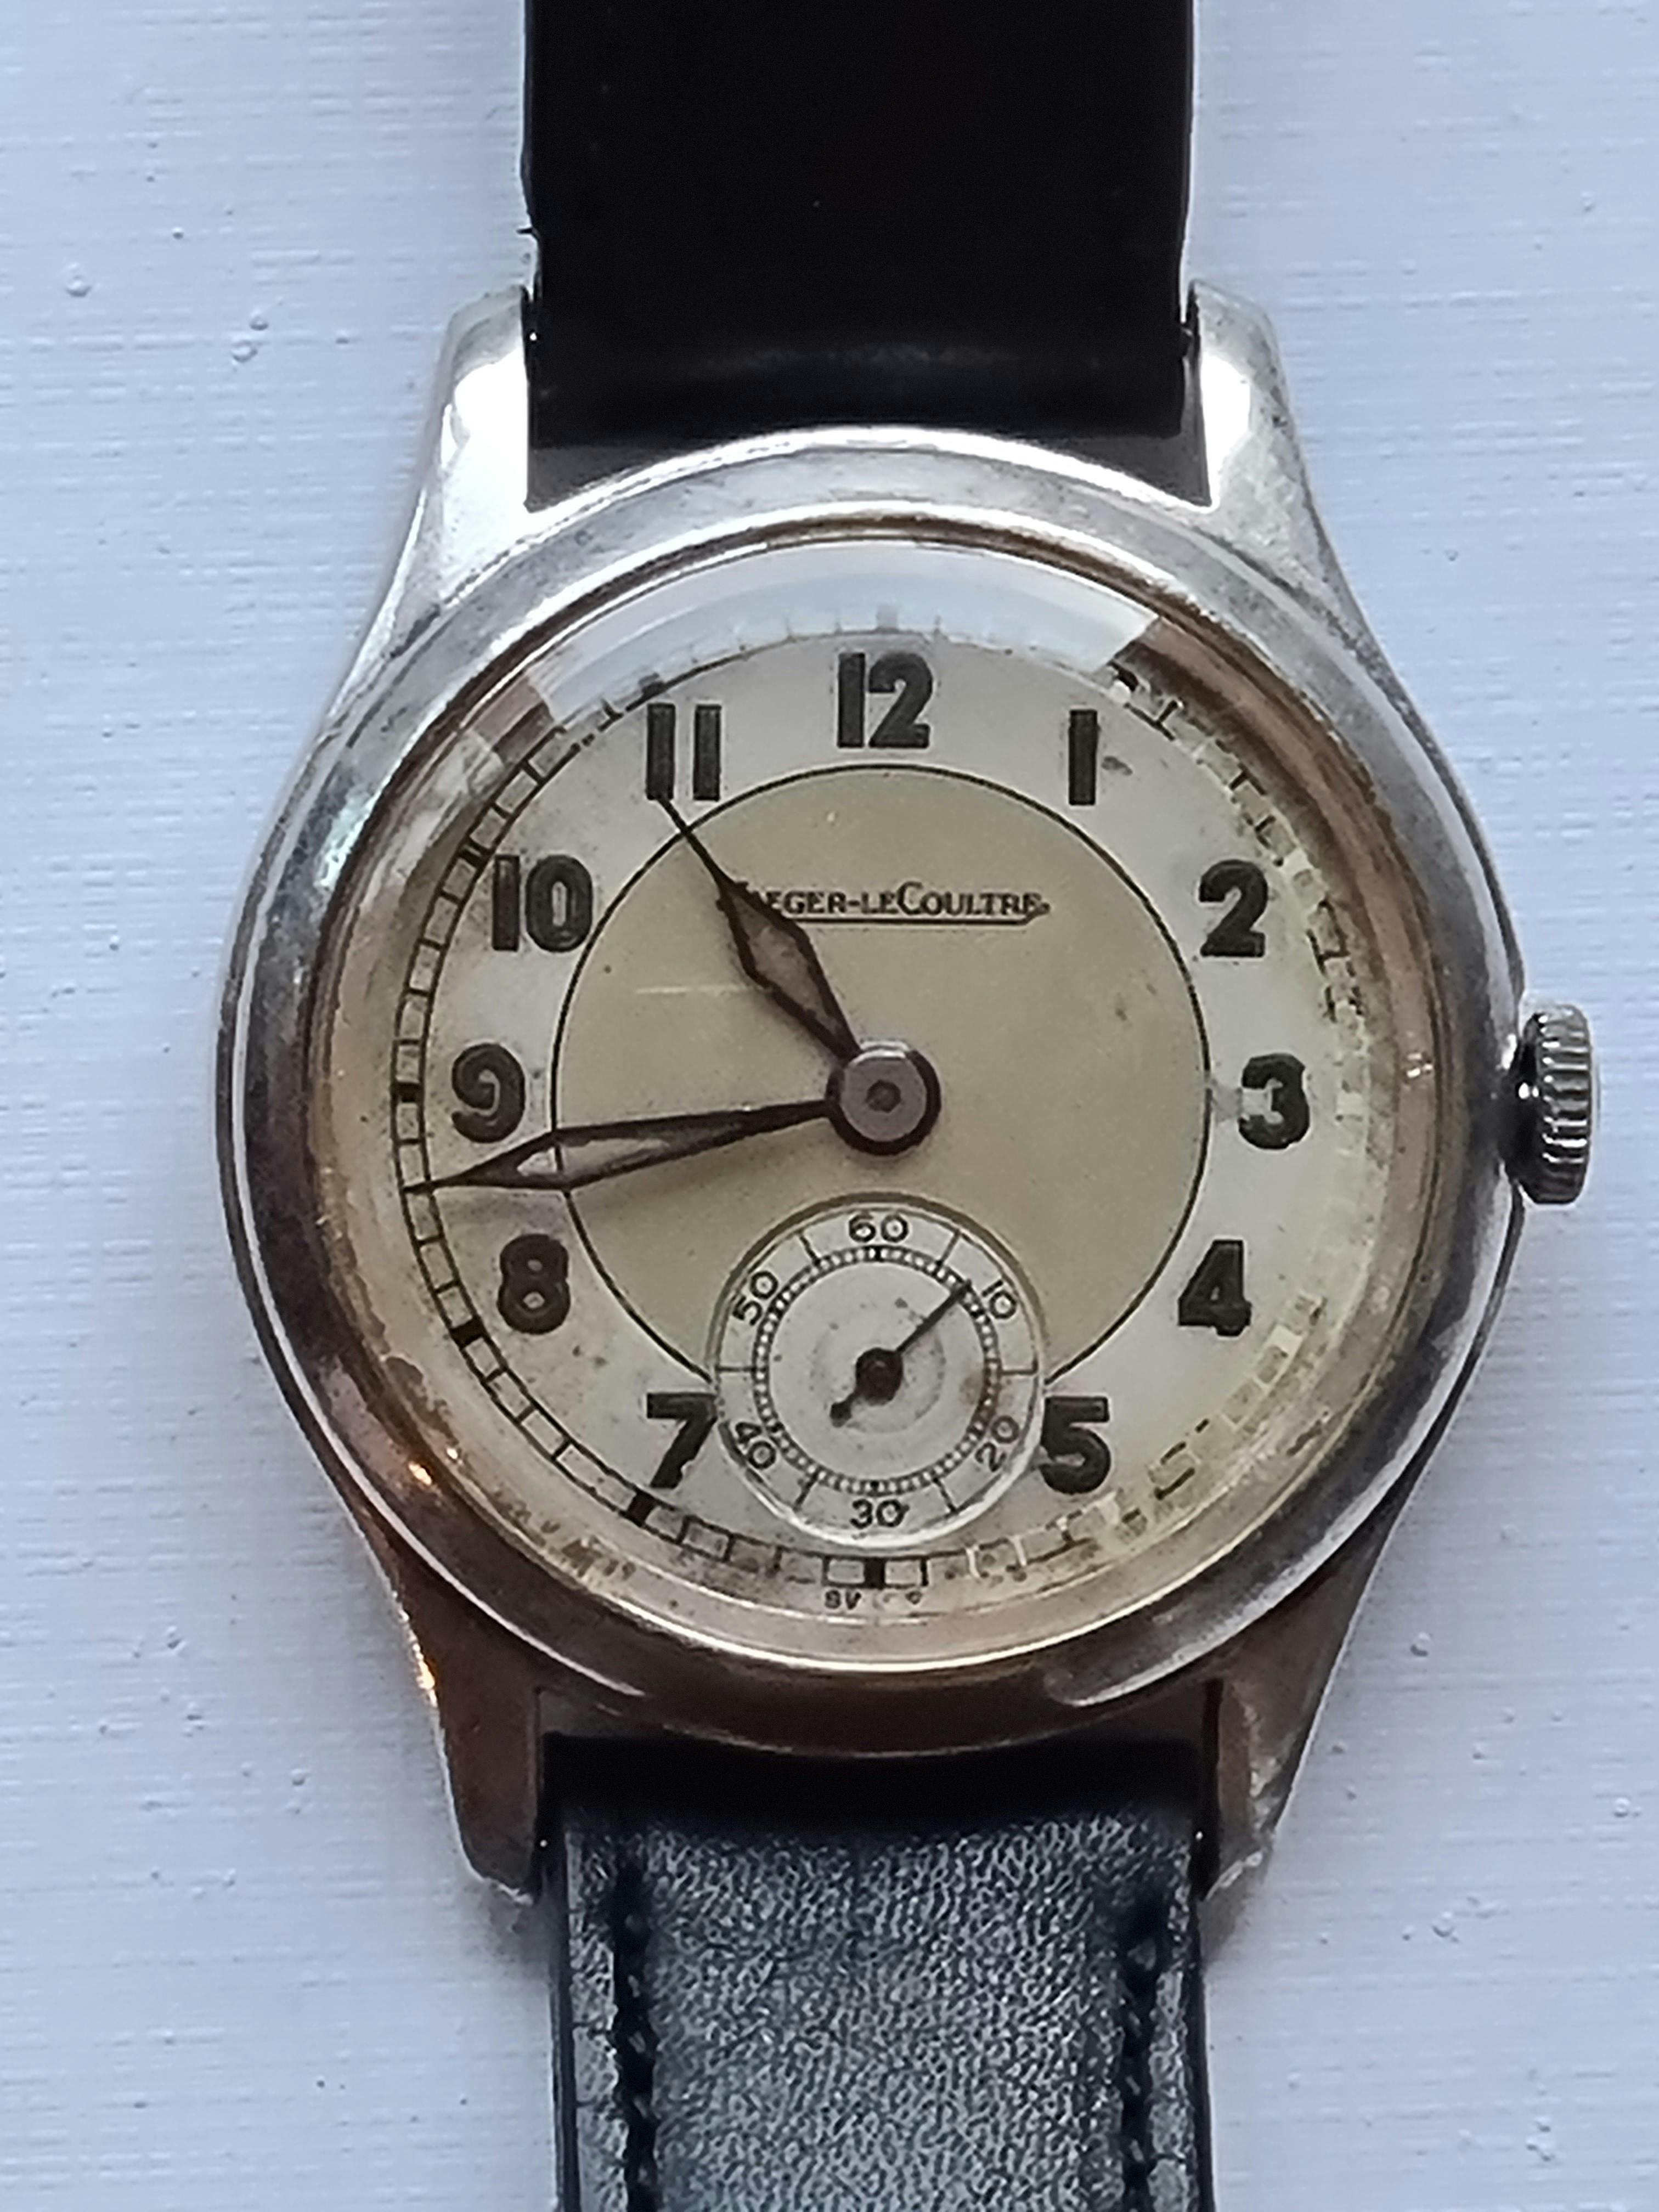 Jaeger LeCoultre Steel Men's Watch from the 1950s